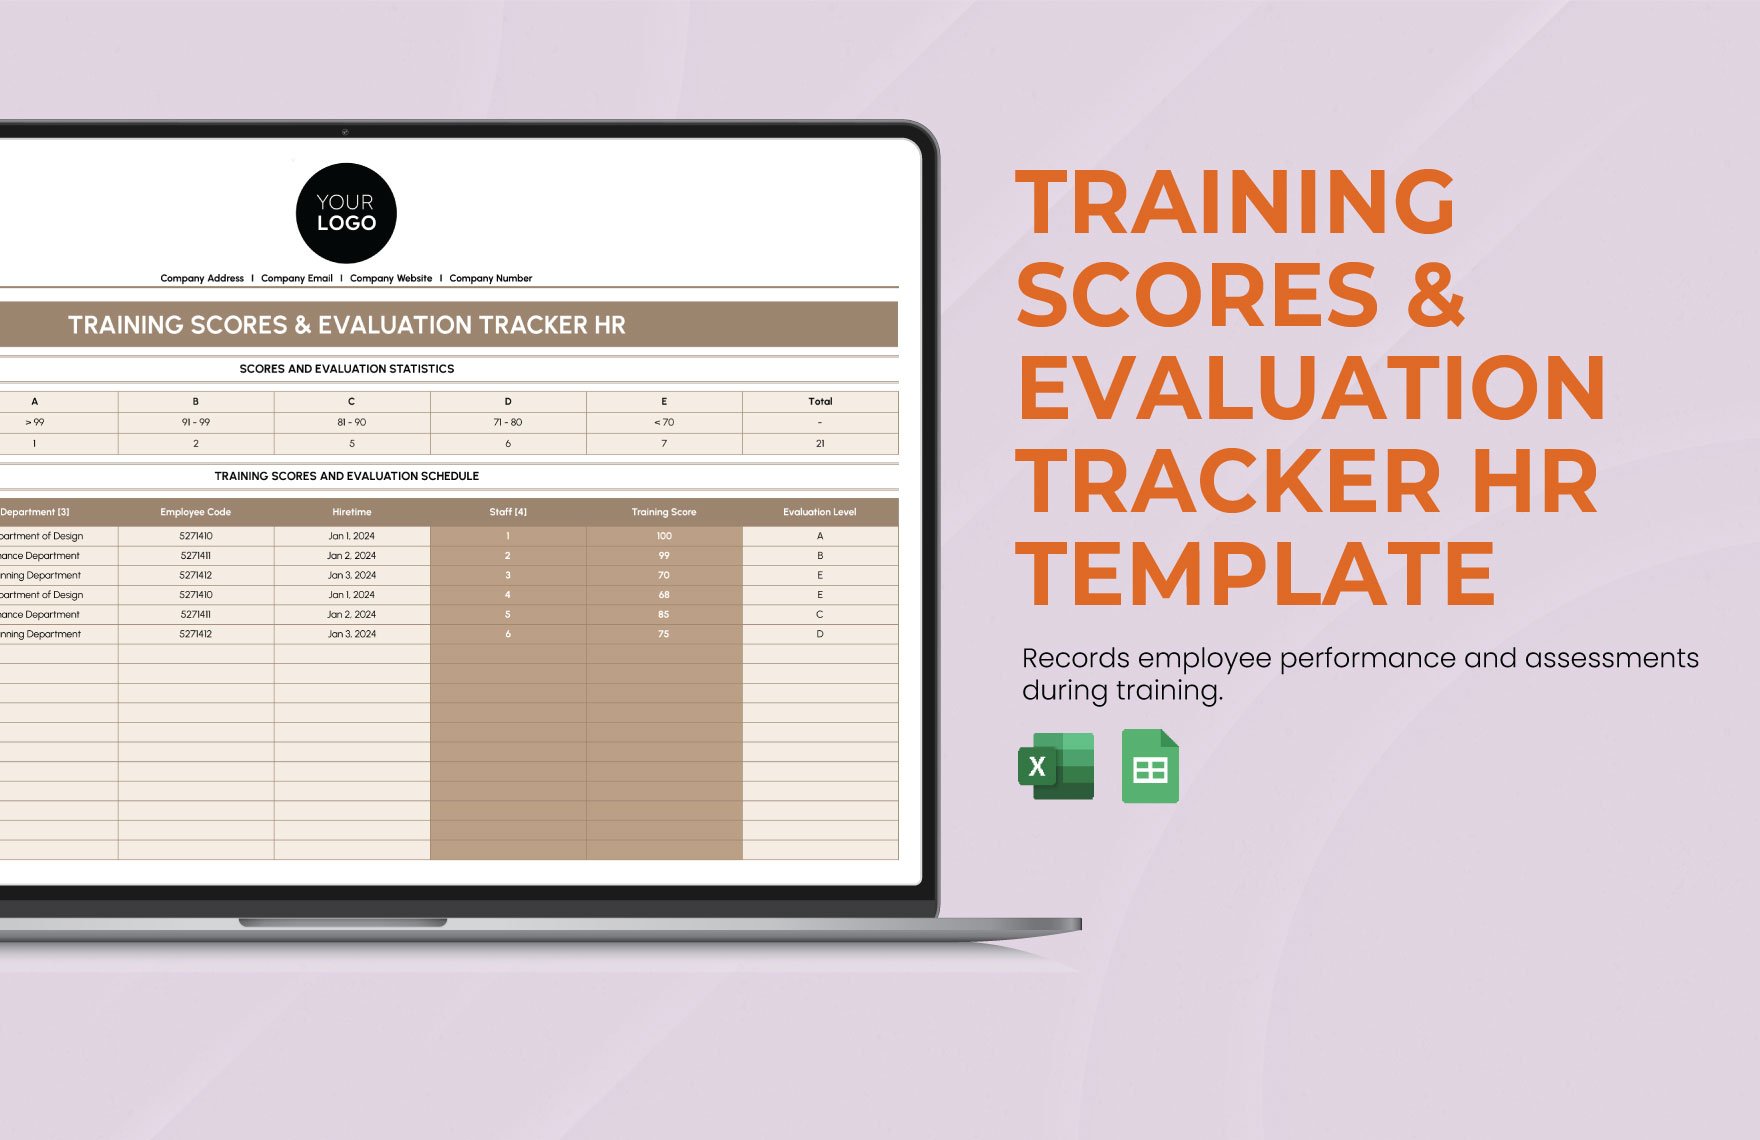 Free Training Scores & Evaluation Tracker HR Template in Excel, Google Sheets